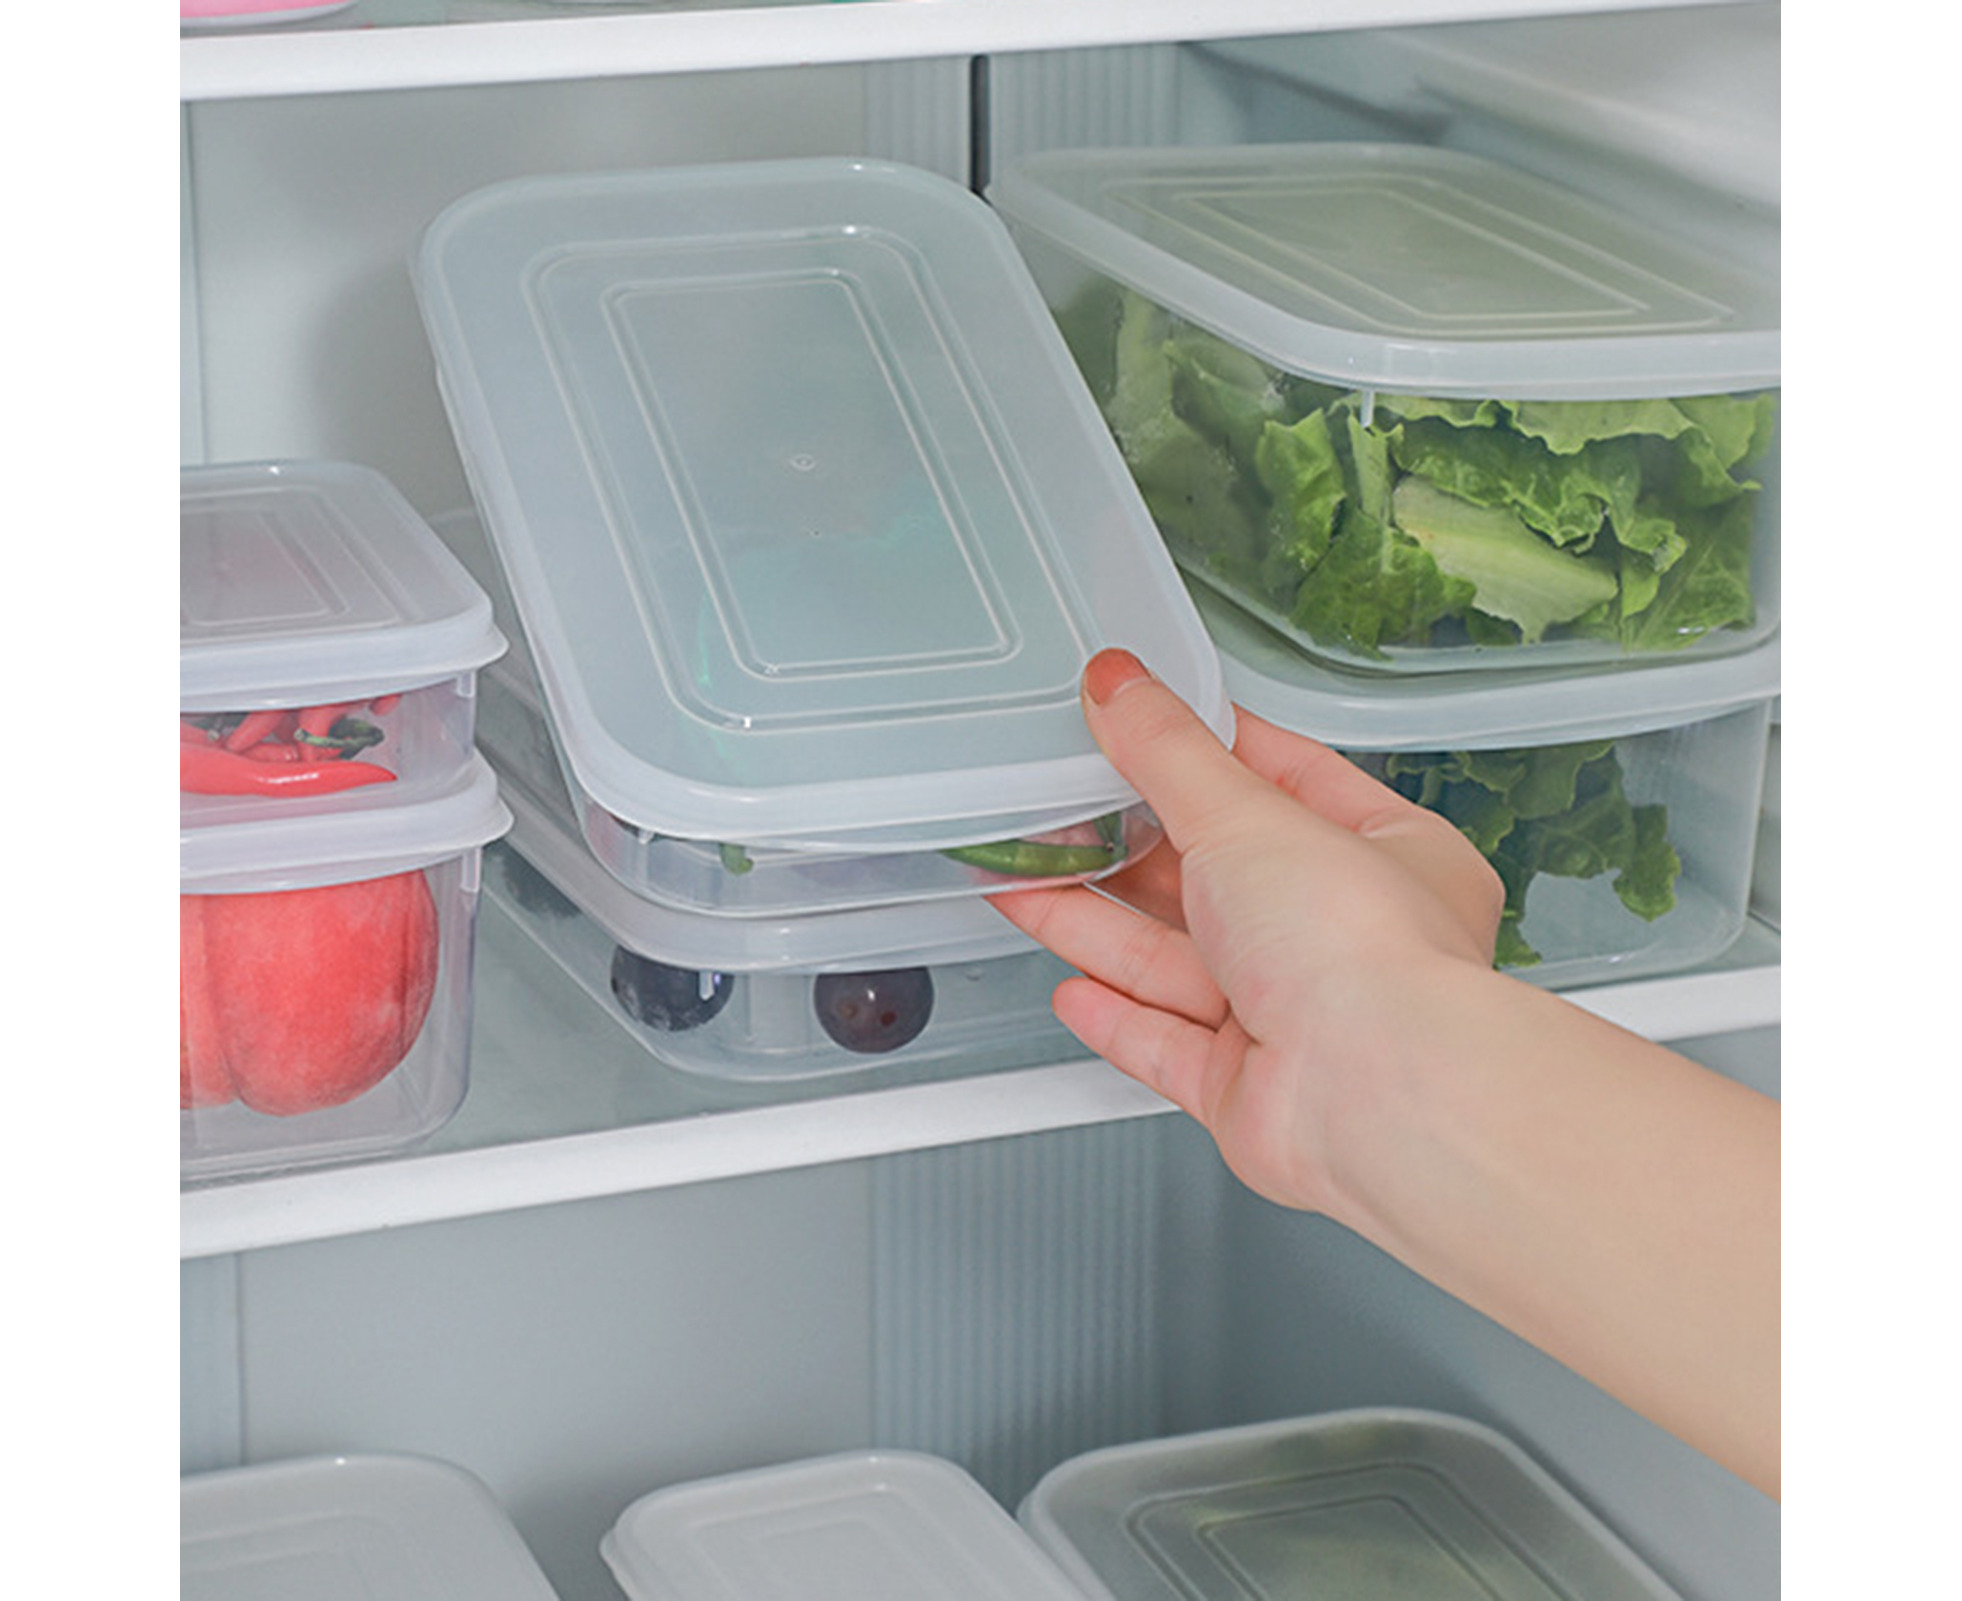 1.15l/2l/3l/4.5l/6.2l Fridge Storage Box Large Capacity Solid Construction Plastic All-Purpose Easy Snap Lock Airtight Food Container for Home, Size